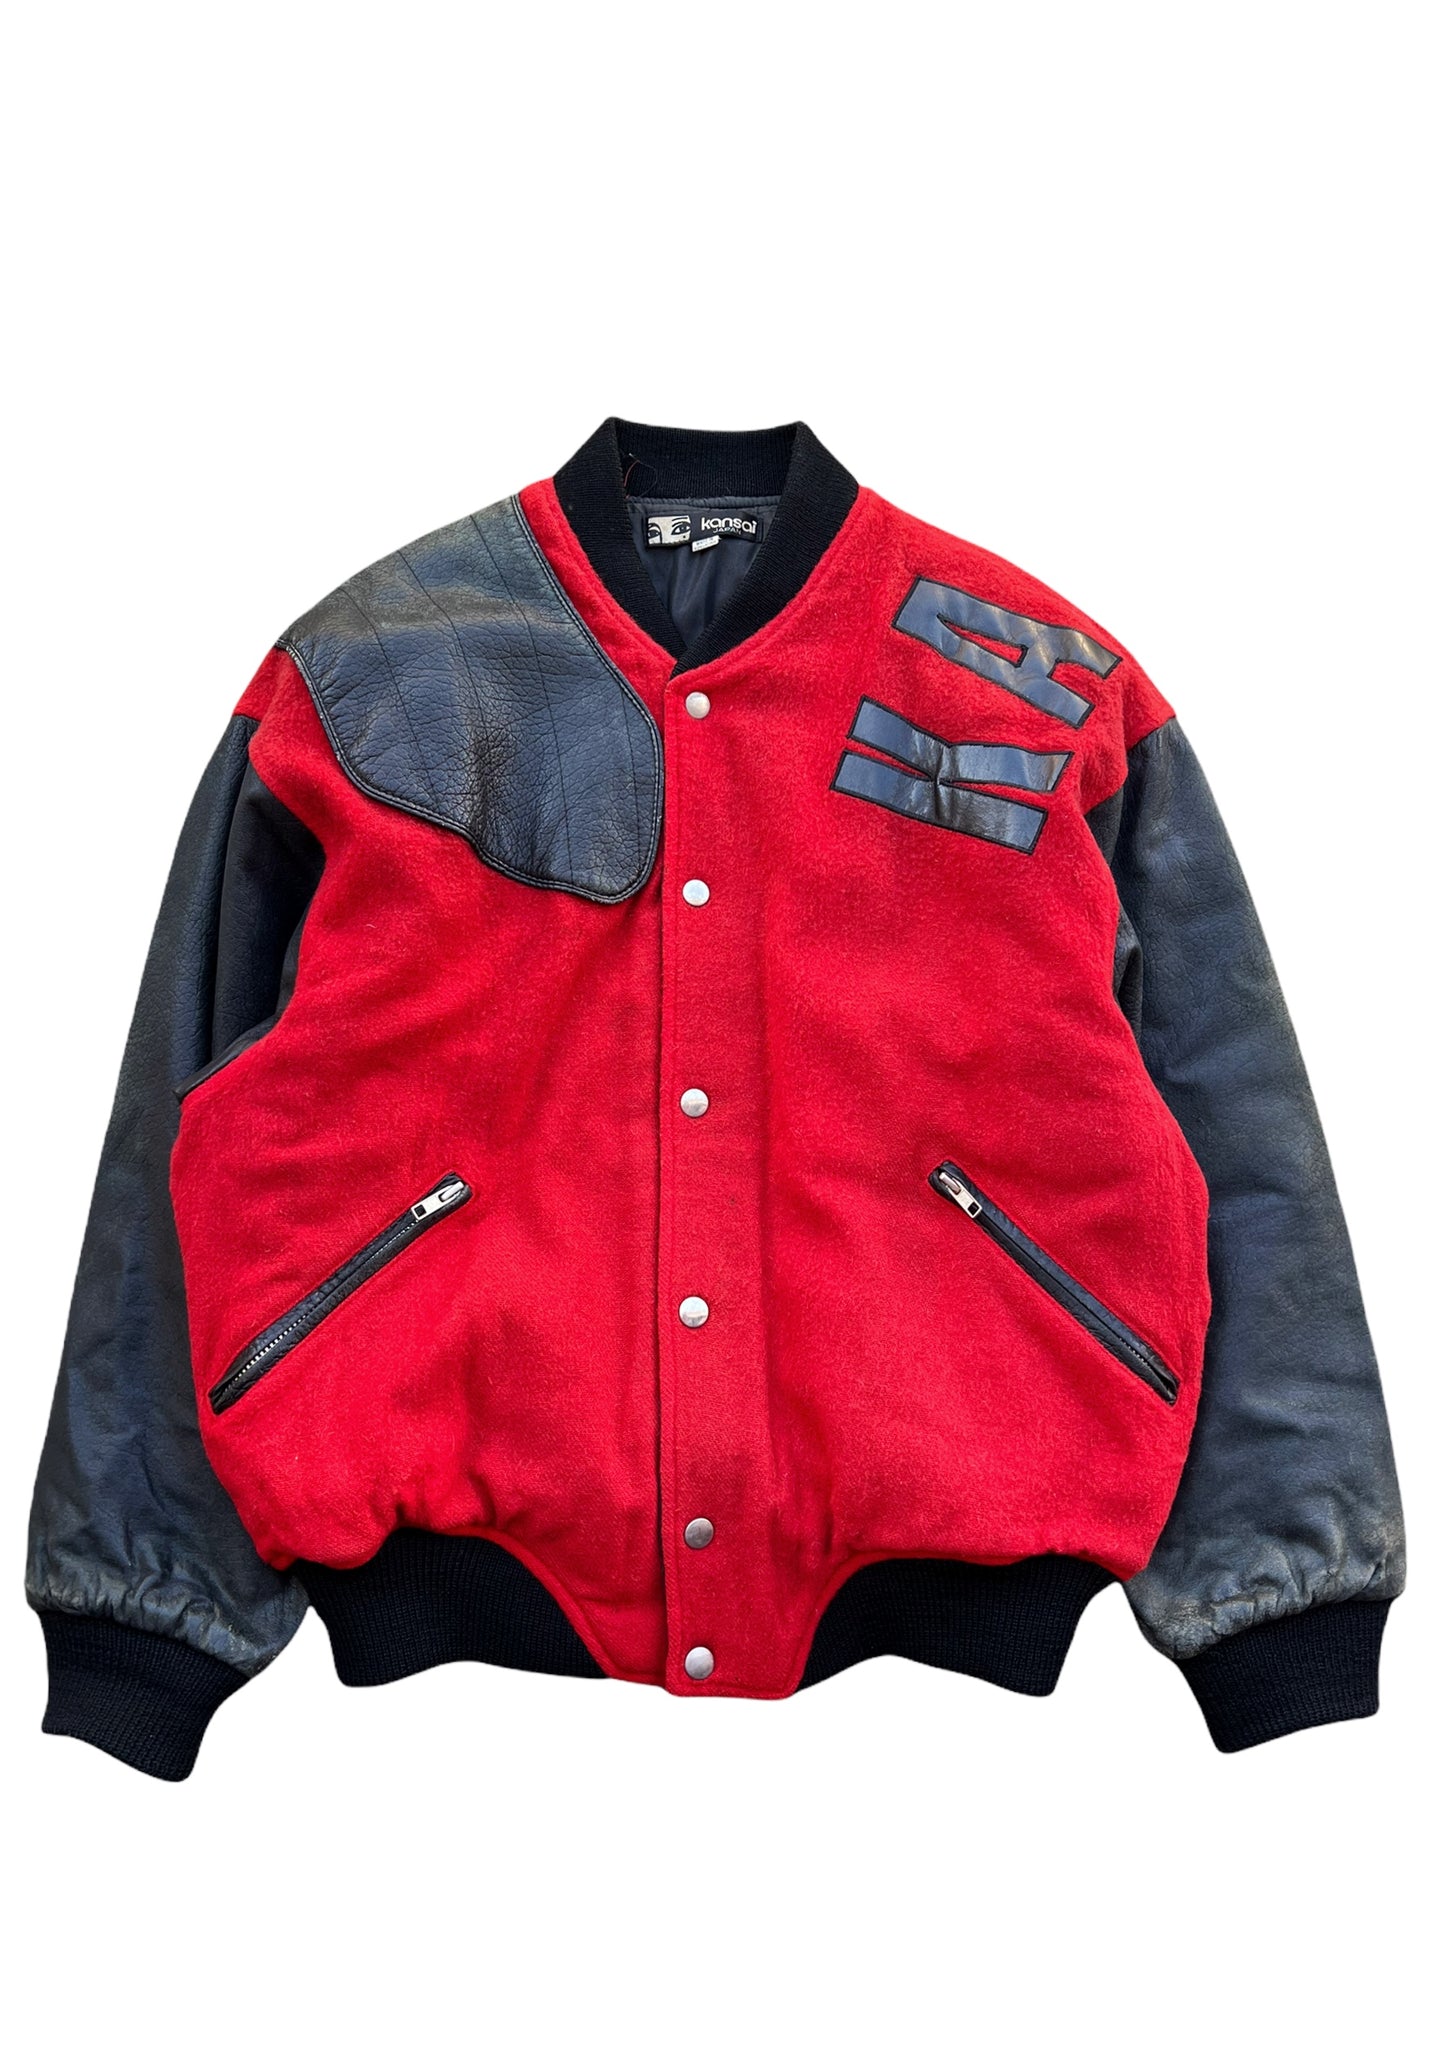 1980’s Patched Bomber